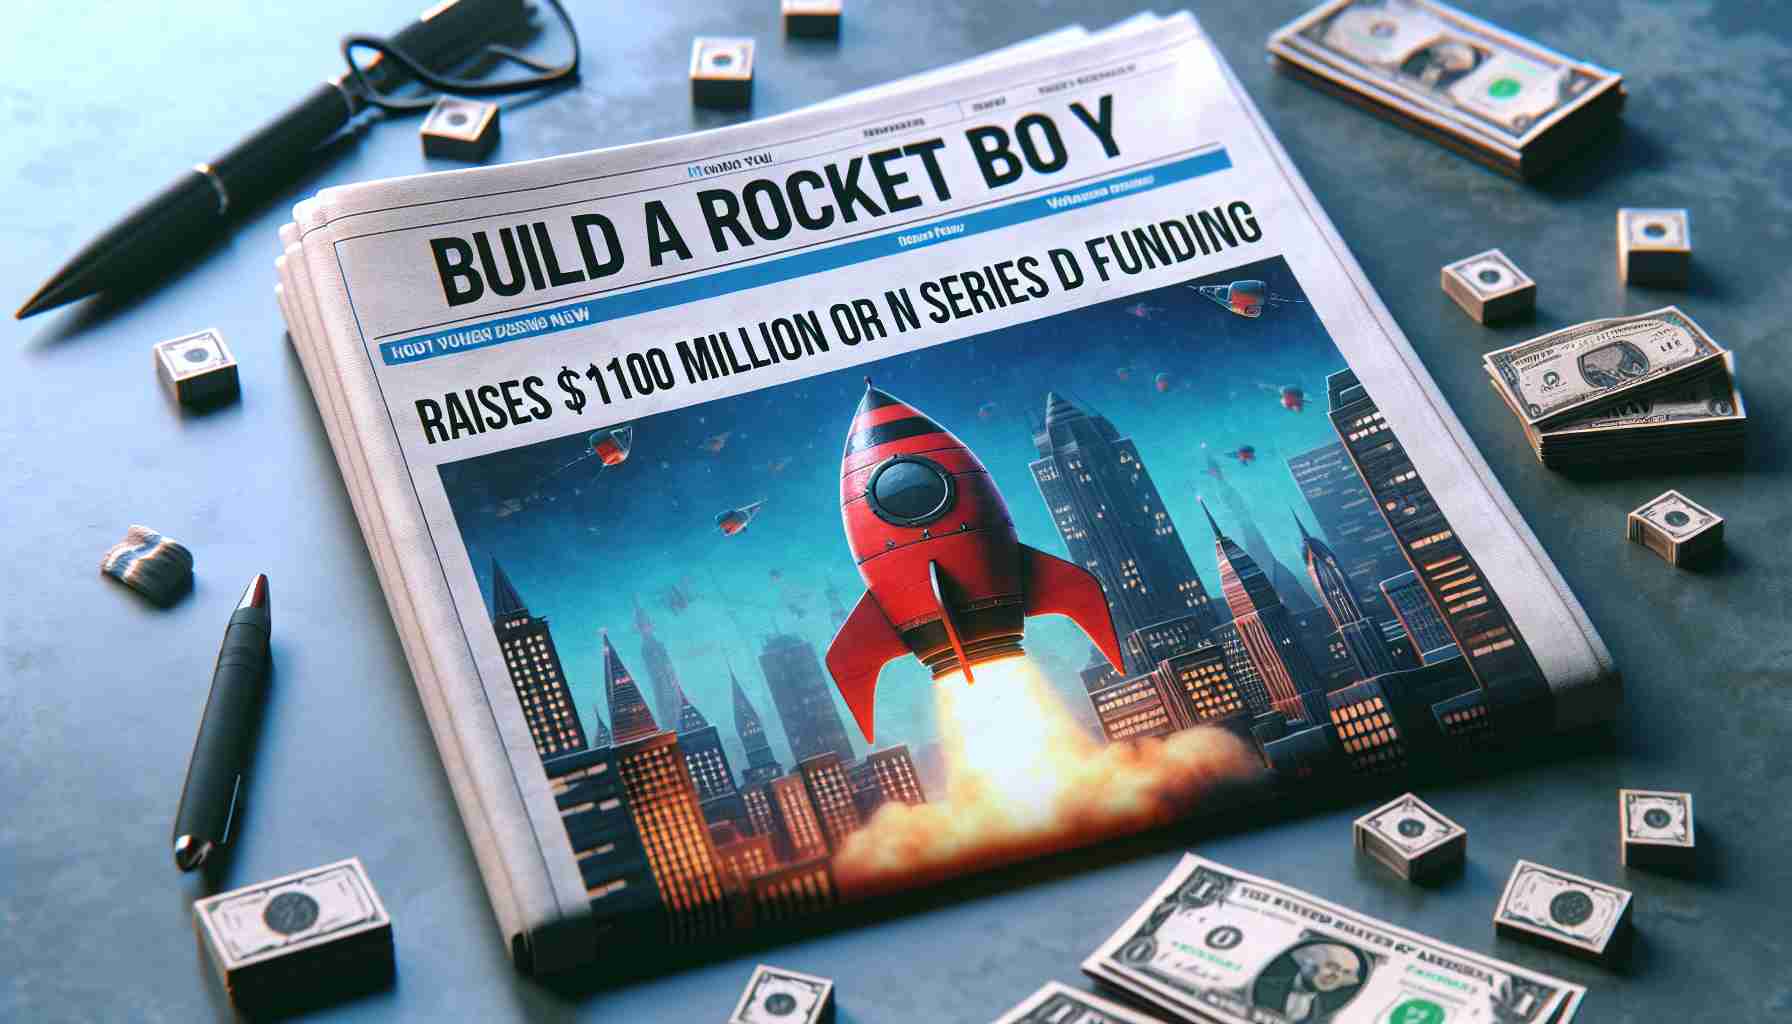 Build A Rocket Boy Secures $110 Million in Series D Funding for Ambitious Project Trio